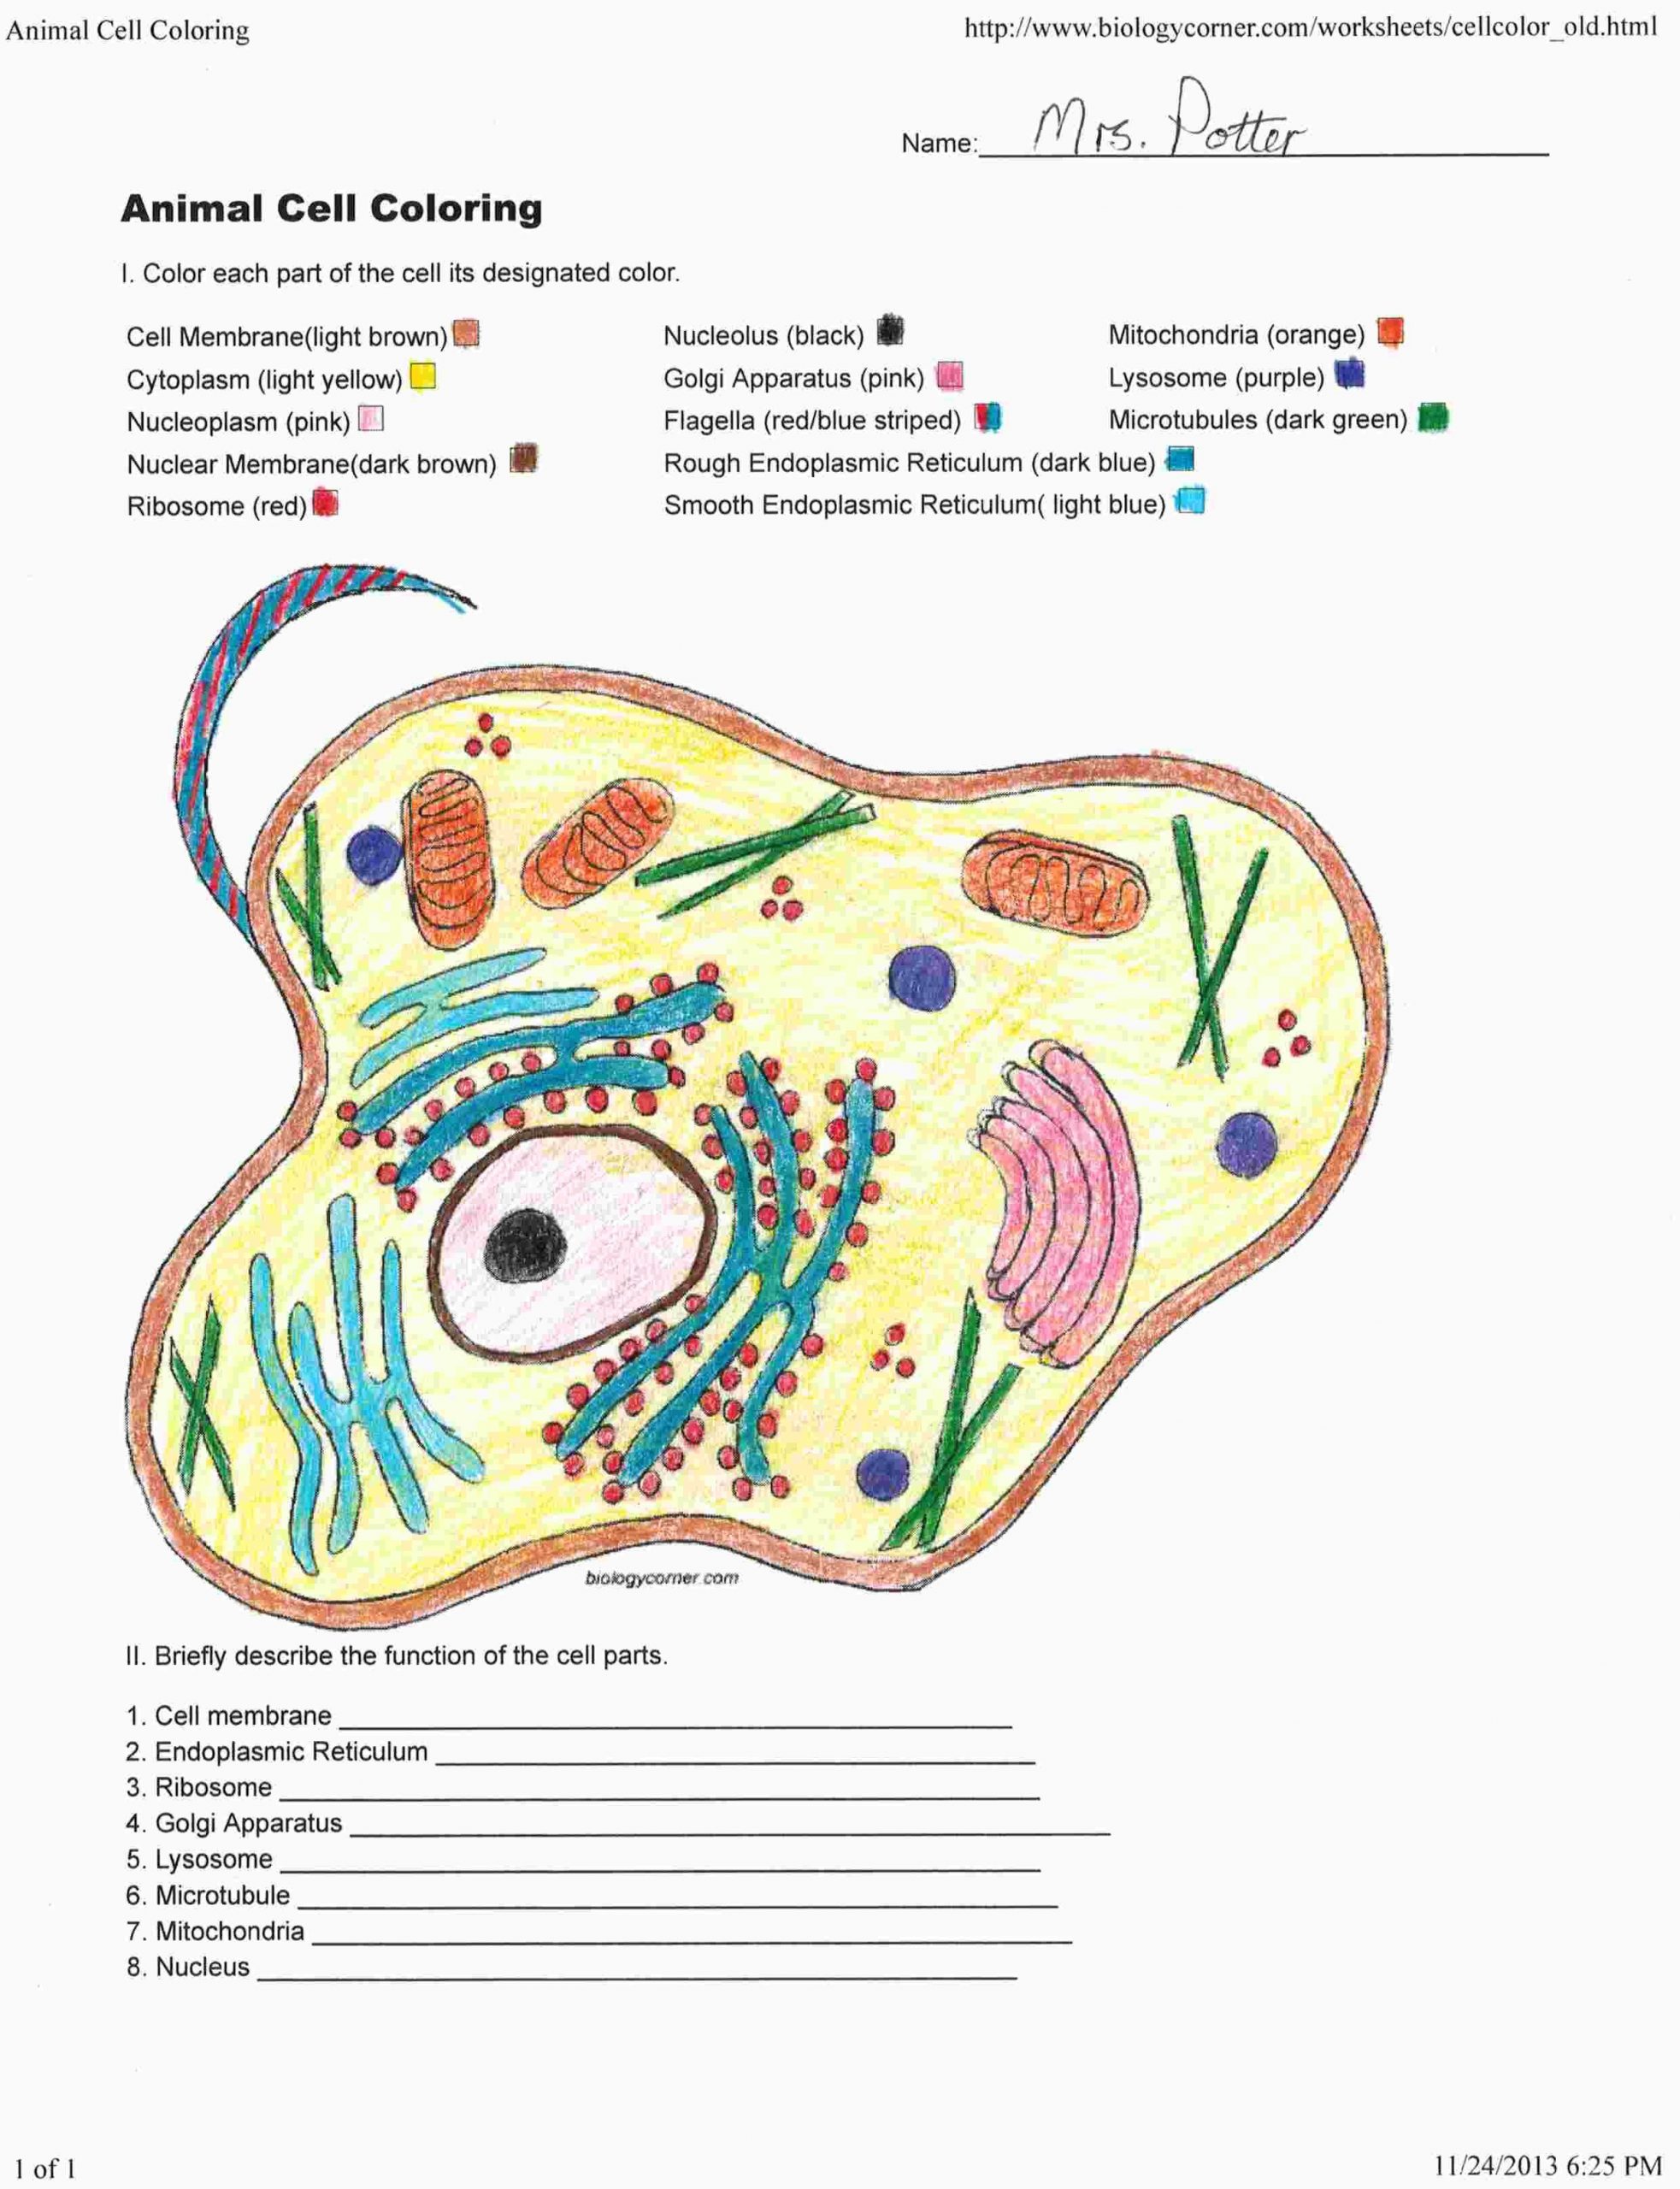 Animal Cell Coloring Worksheet Coloring Sheet Labeled Animal Cell Coloring Key